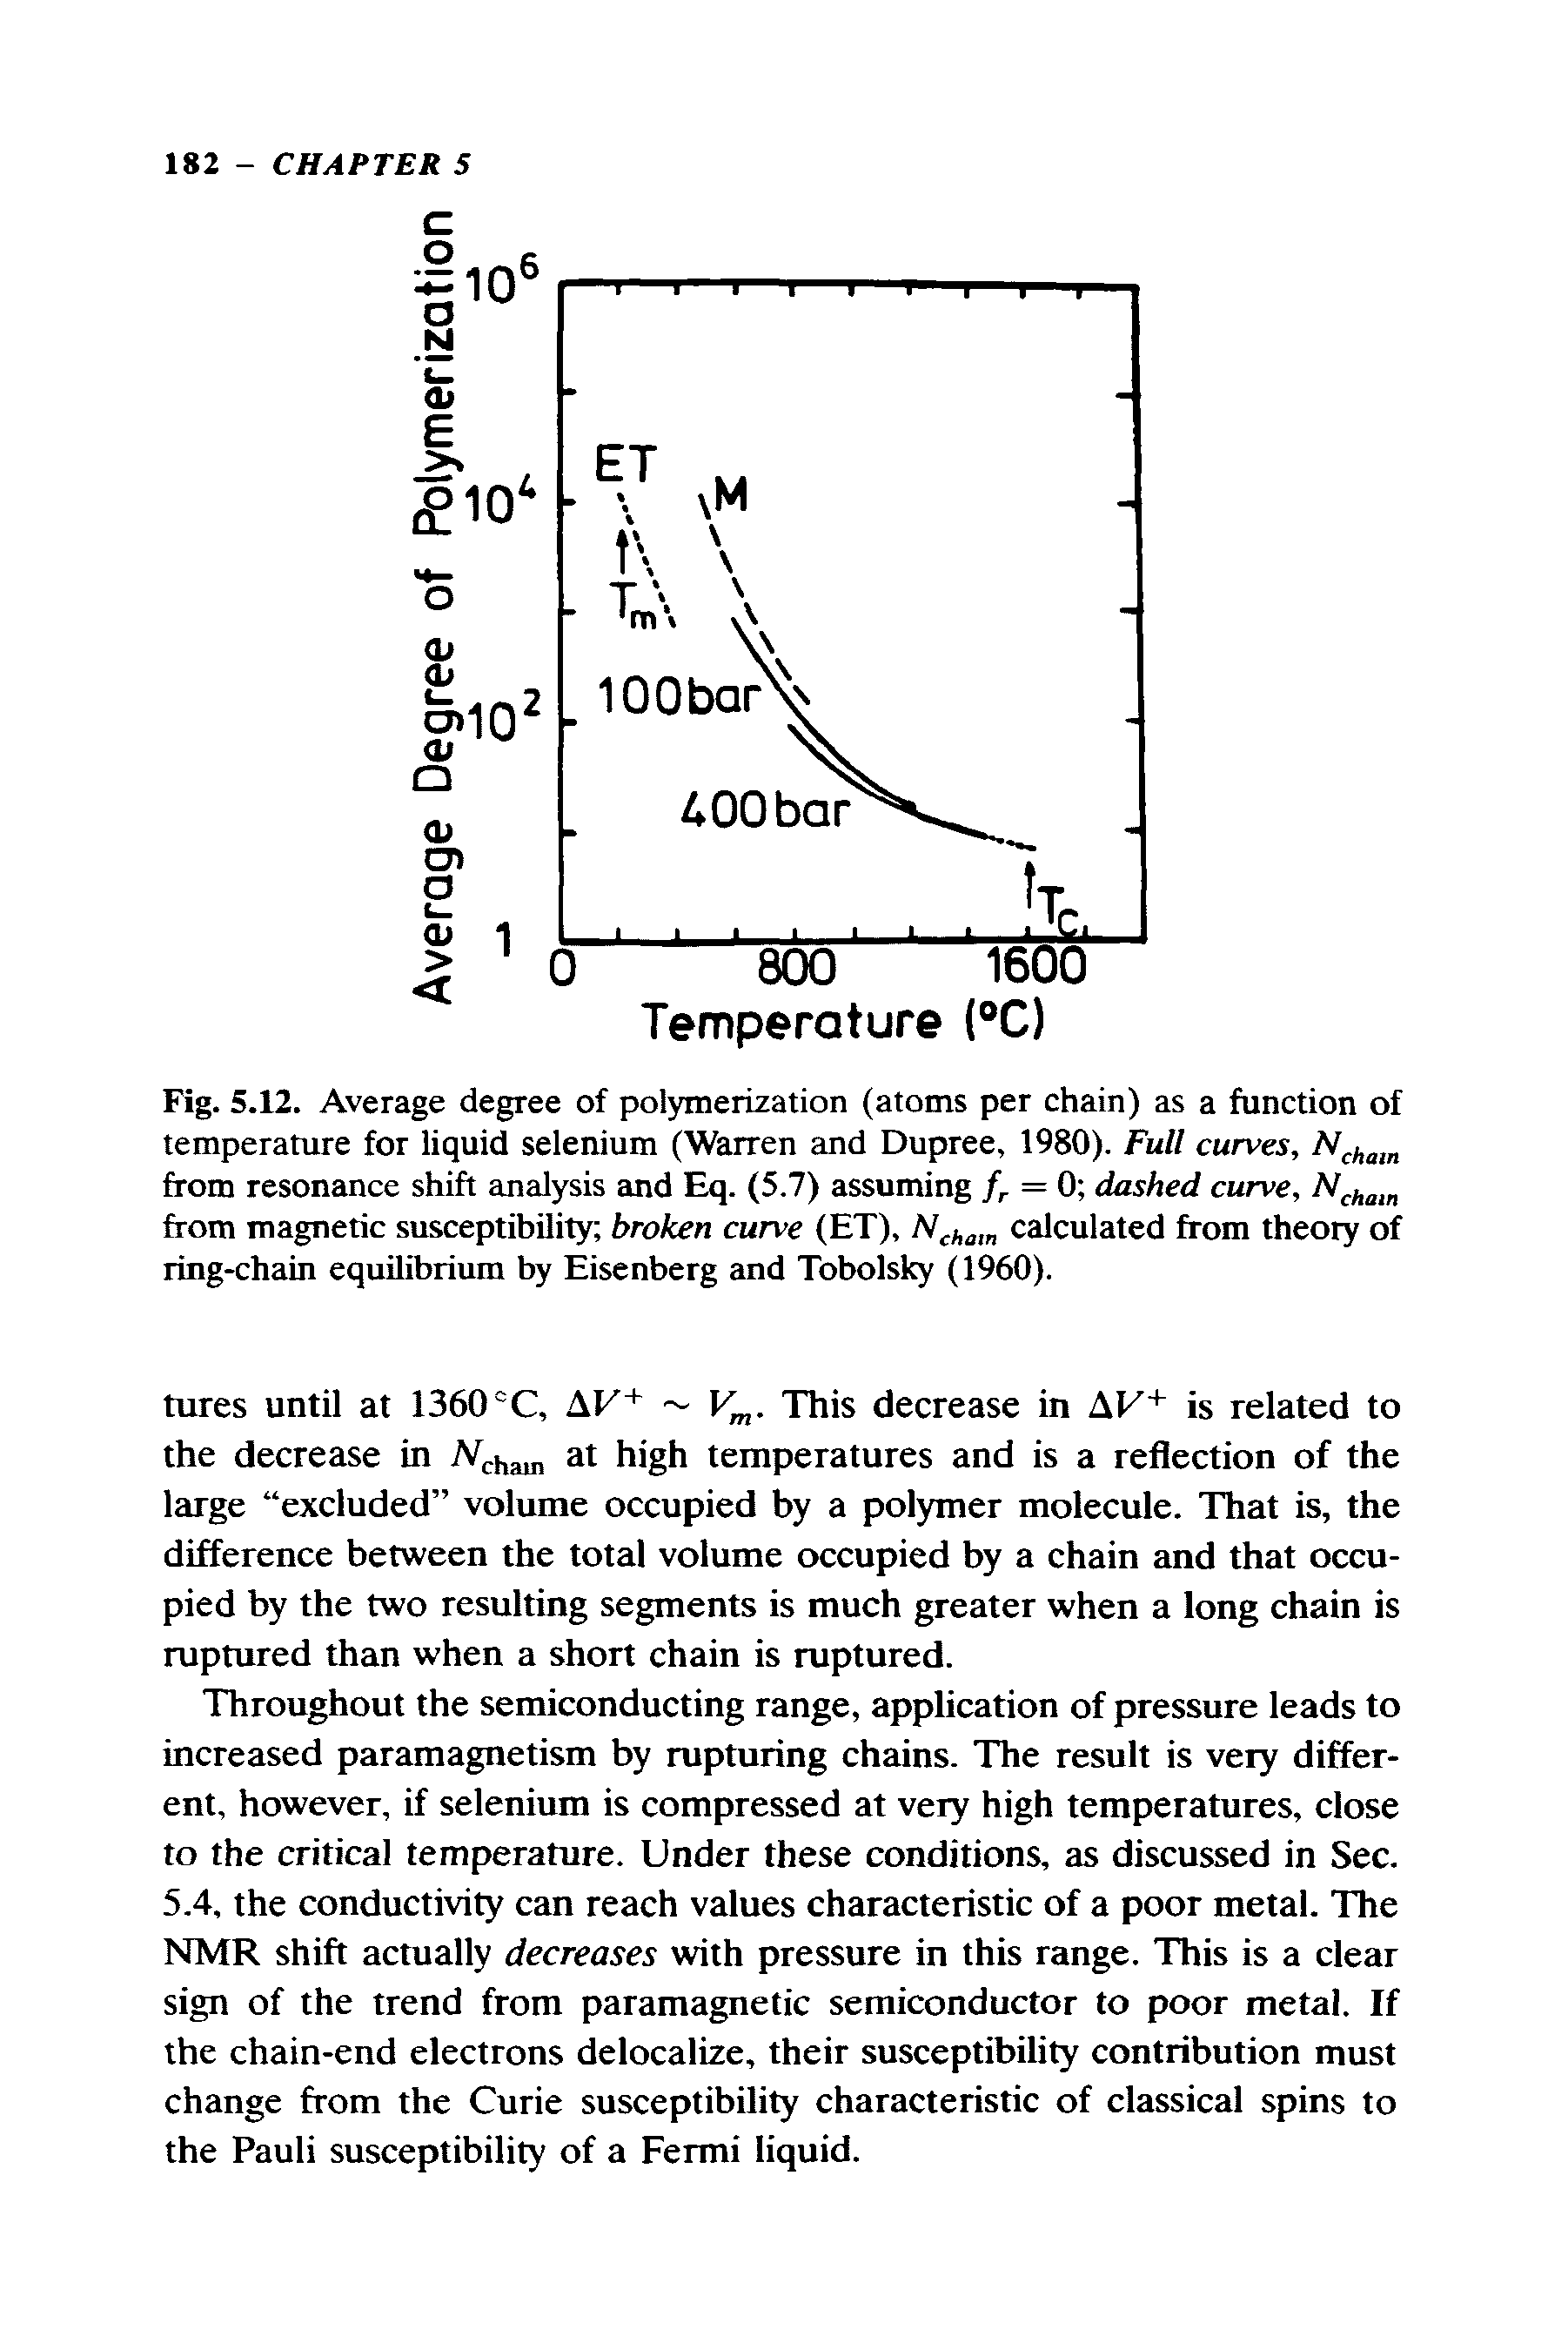 Fig. 5.12. Average degree of polymerization (atoms per chain) as a function of temperature for liquid selenium (Warren and Dupree, 1980). Full curves, Nchain from resonance shift analysis tmd Eq. (5.7) assuming /. = 0 dashed curve, Nc am from magnetic susceptibility broken curve (ET), calculated from theory of ring-chain equilibrium by Eisenberg and Tobolsky (1960).